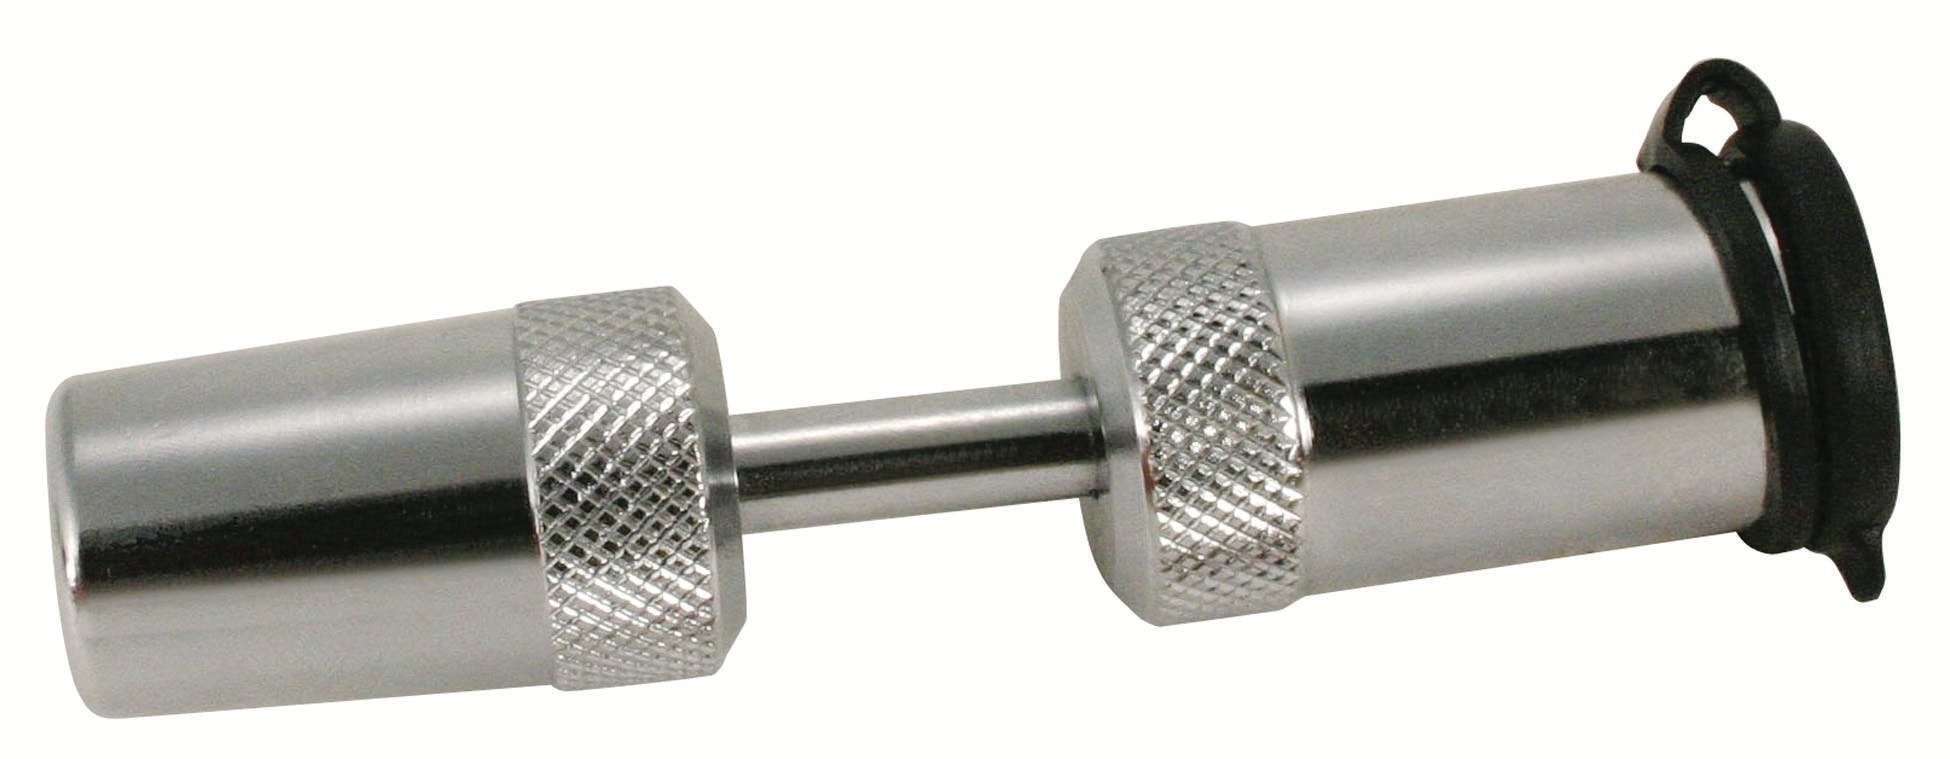 TRIMAX TC1 Coupler Lock (Fits Couplers W/ Up To 7/8 inch Span)